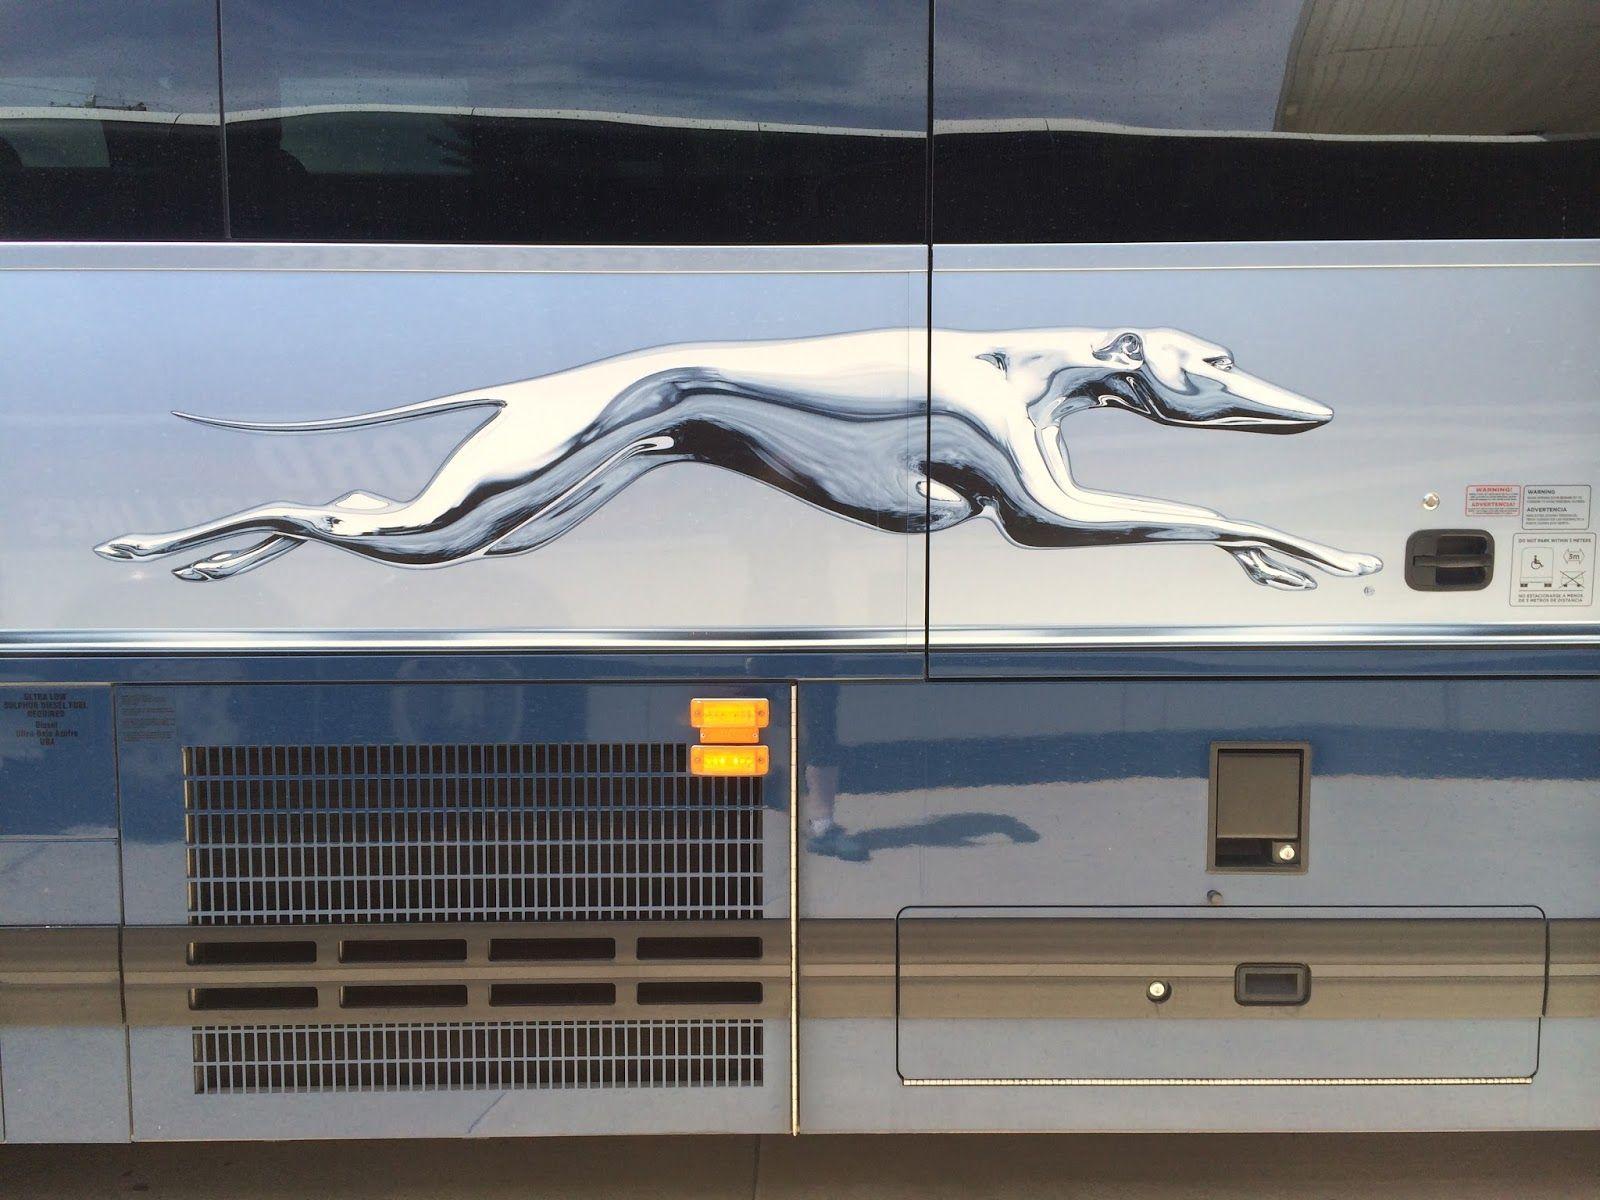 Silver Dog Logo - Tina's Travels: The View from Here: Bangor by Bus